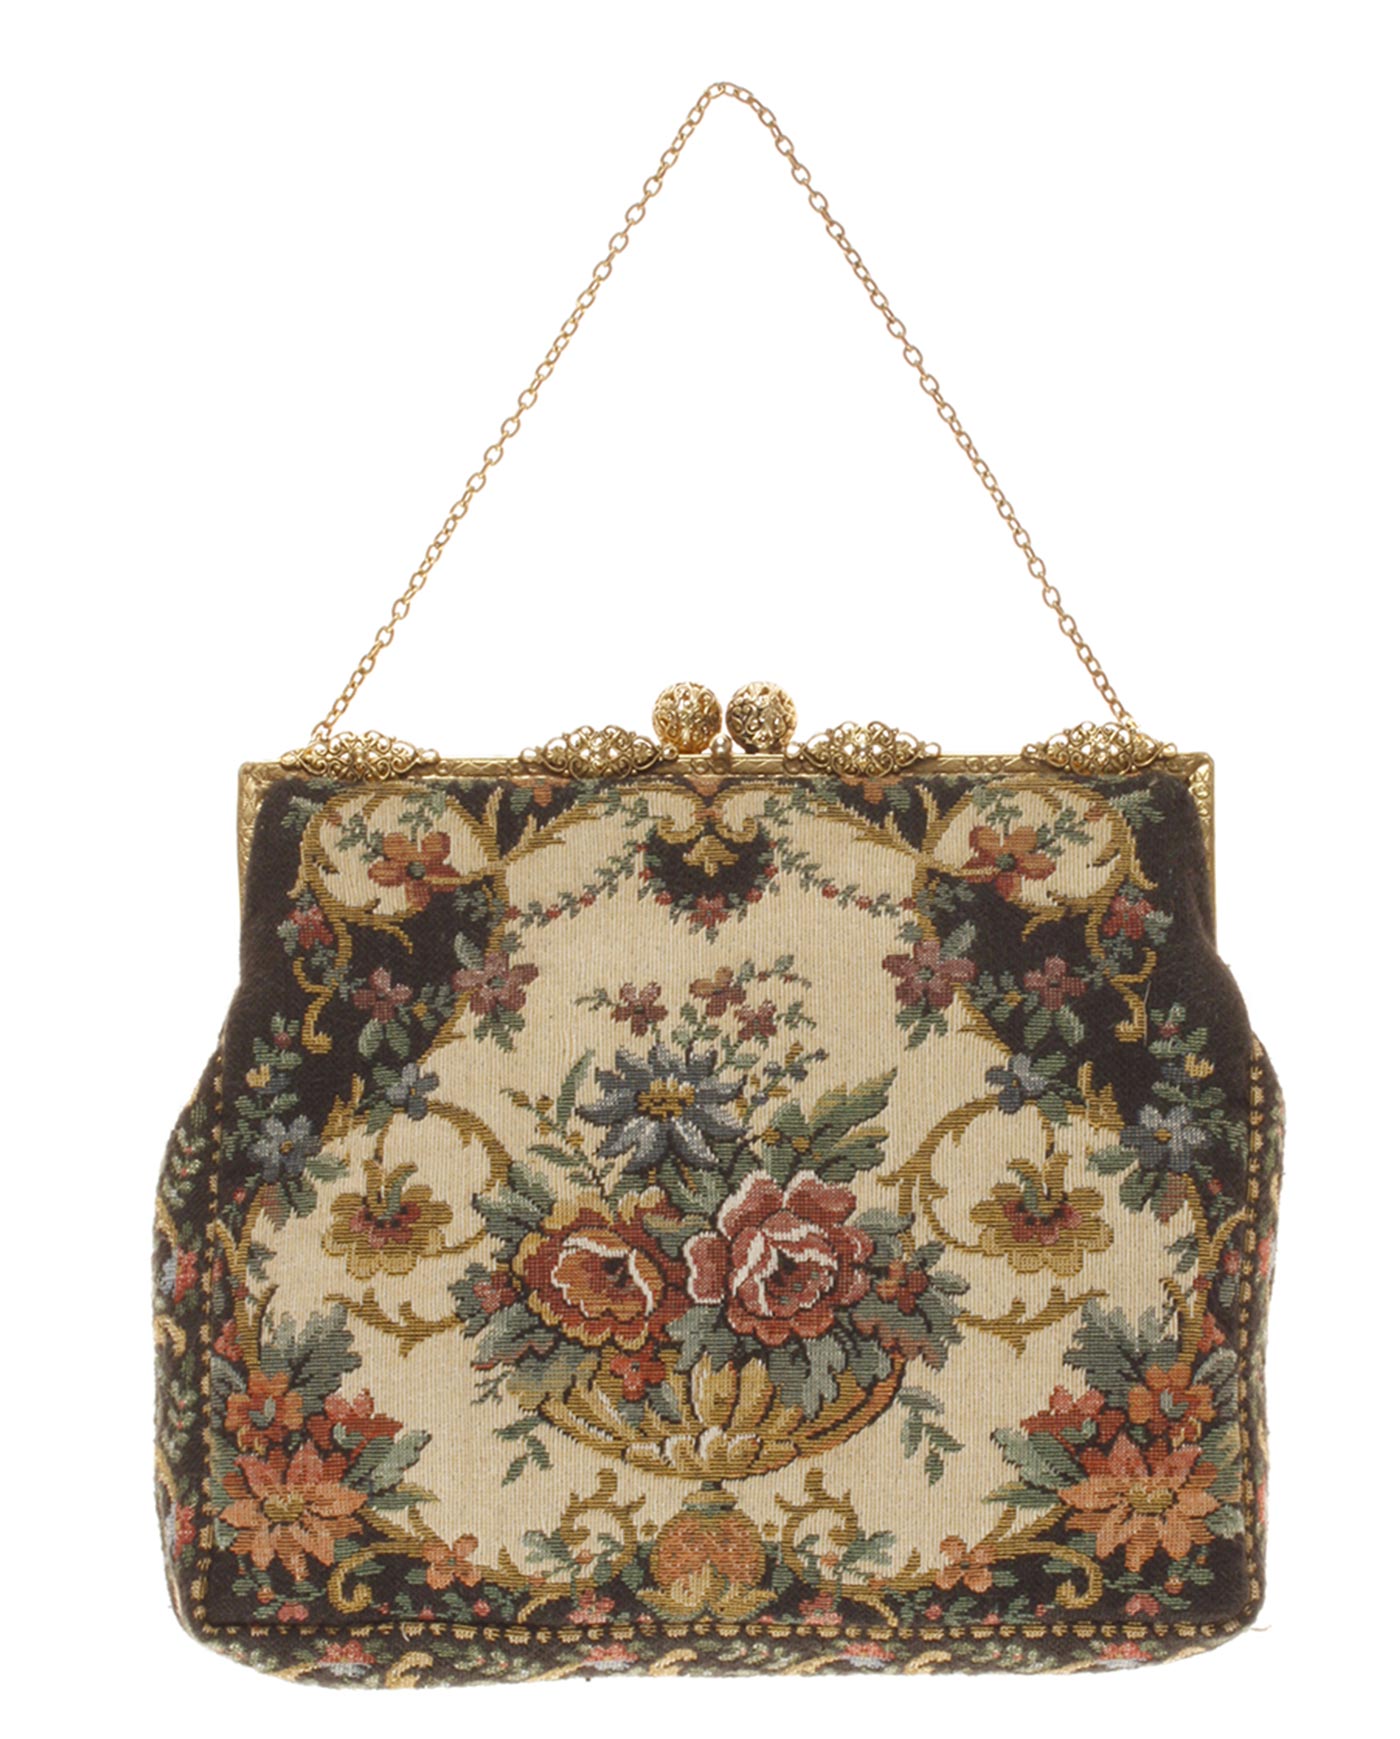 vintage Tapestry bag late 19th/early 20th century